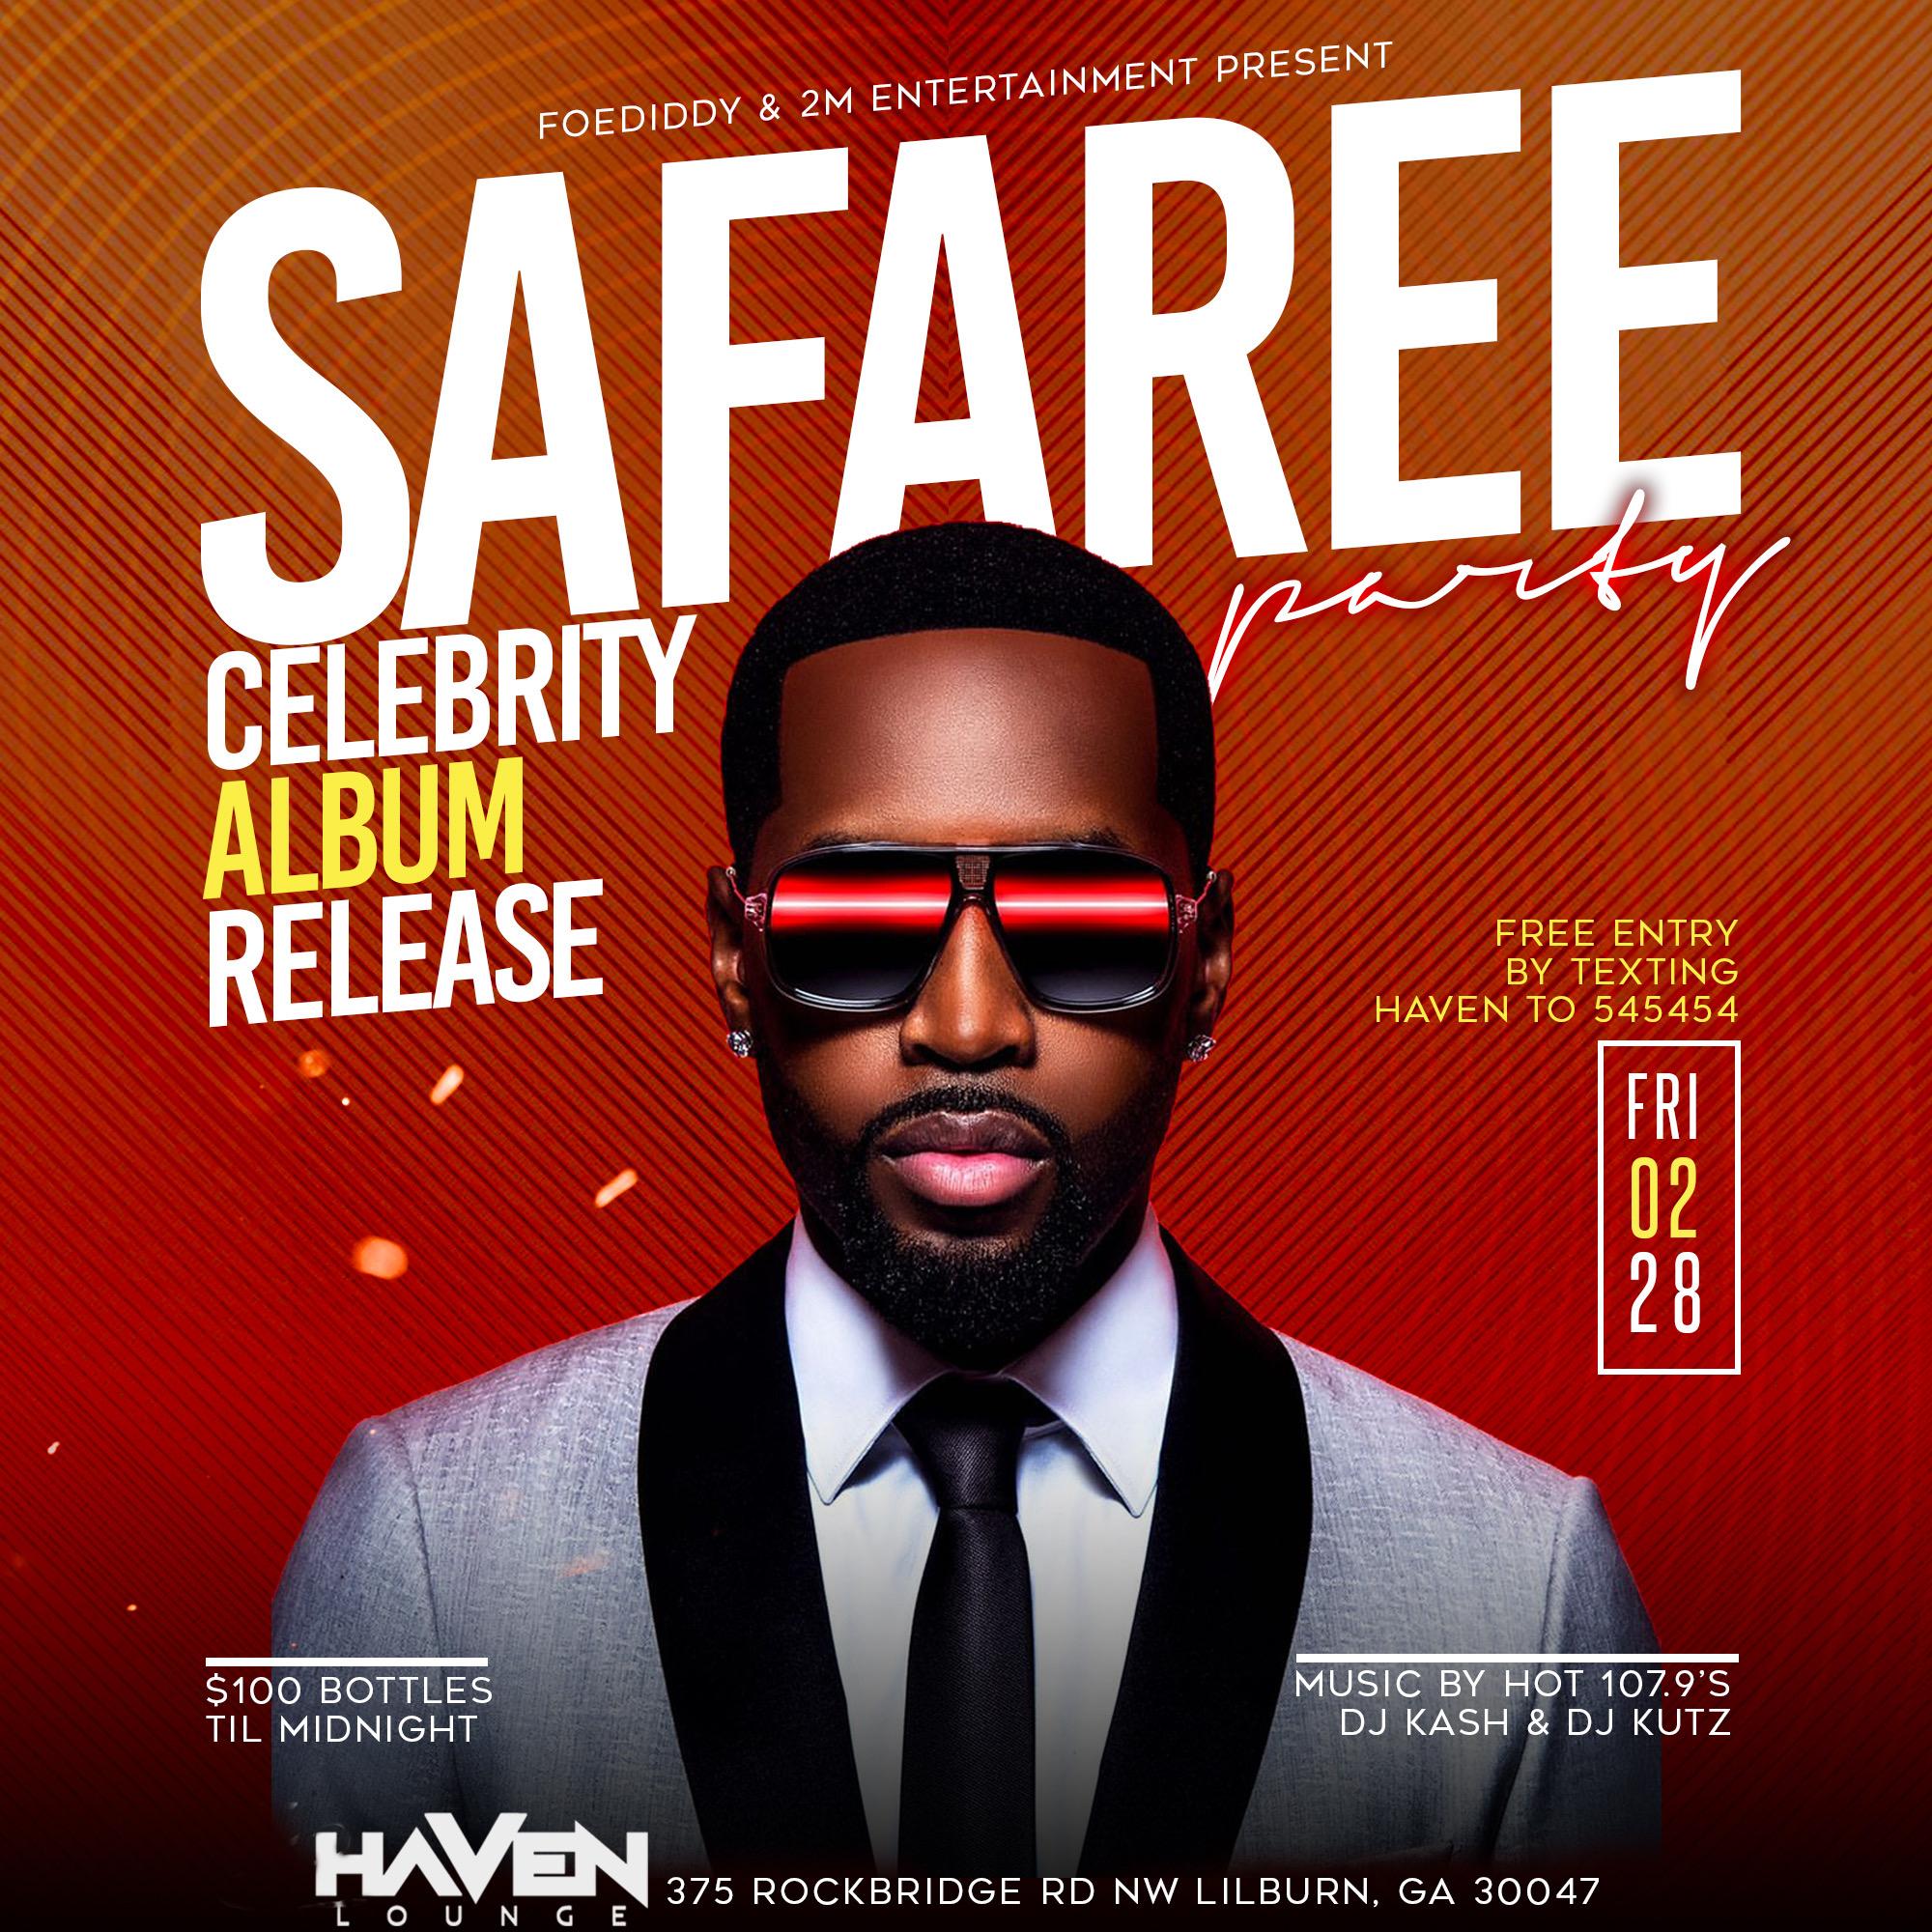 SAFAREE Celebrity Album Release Party Friday at Haven Lounge